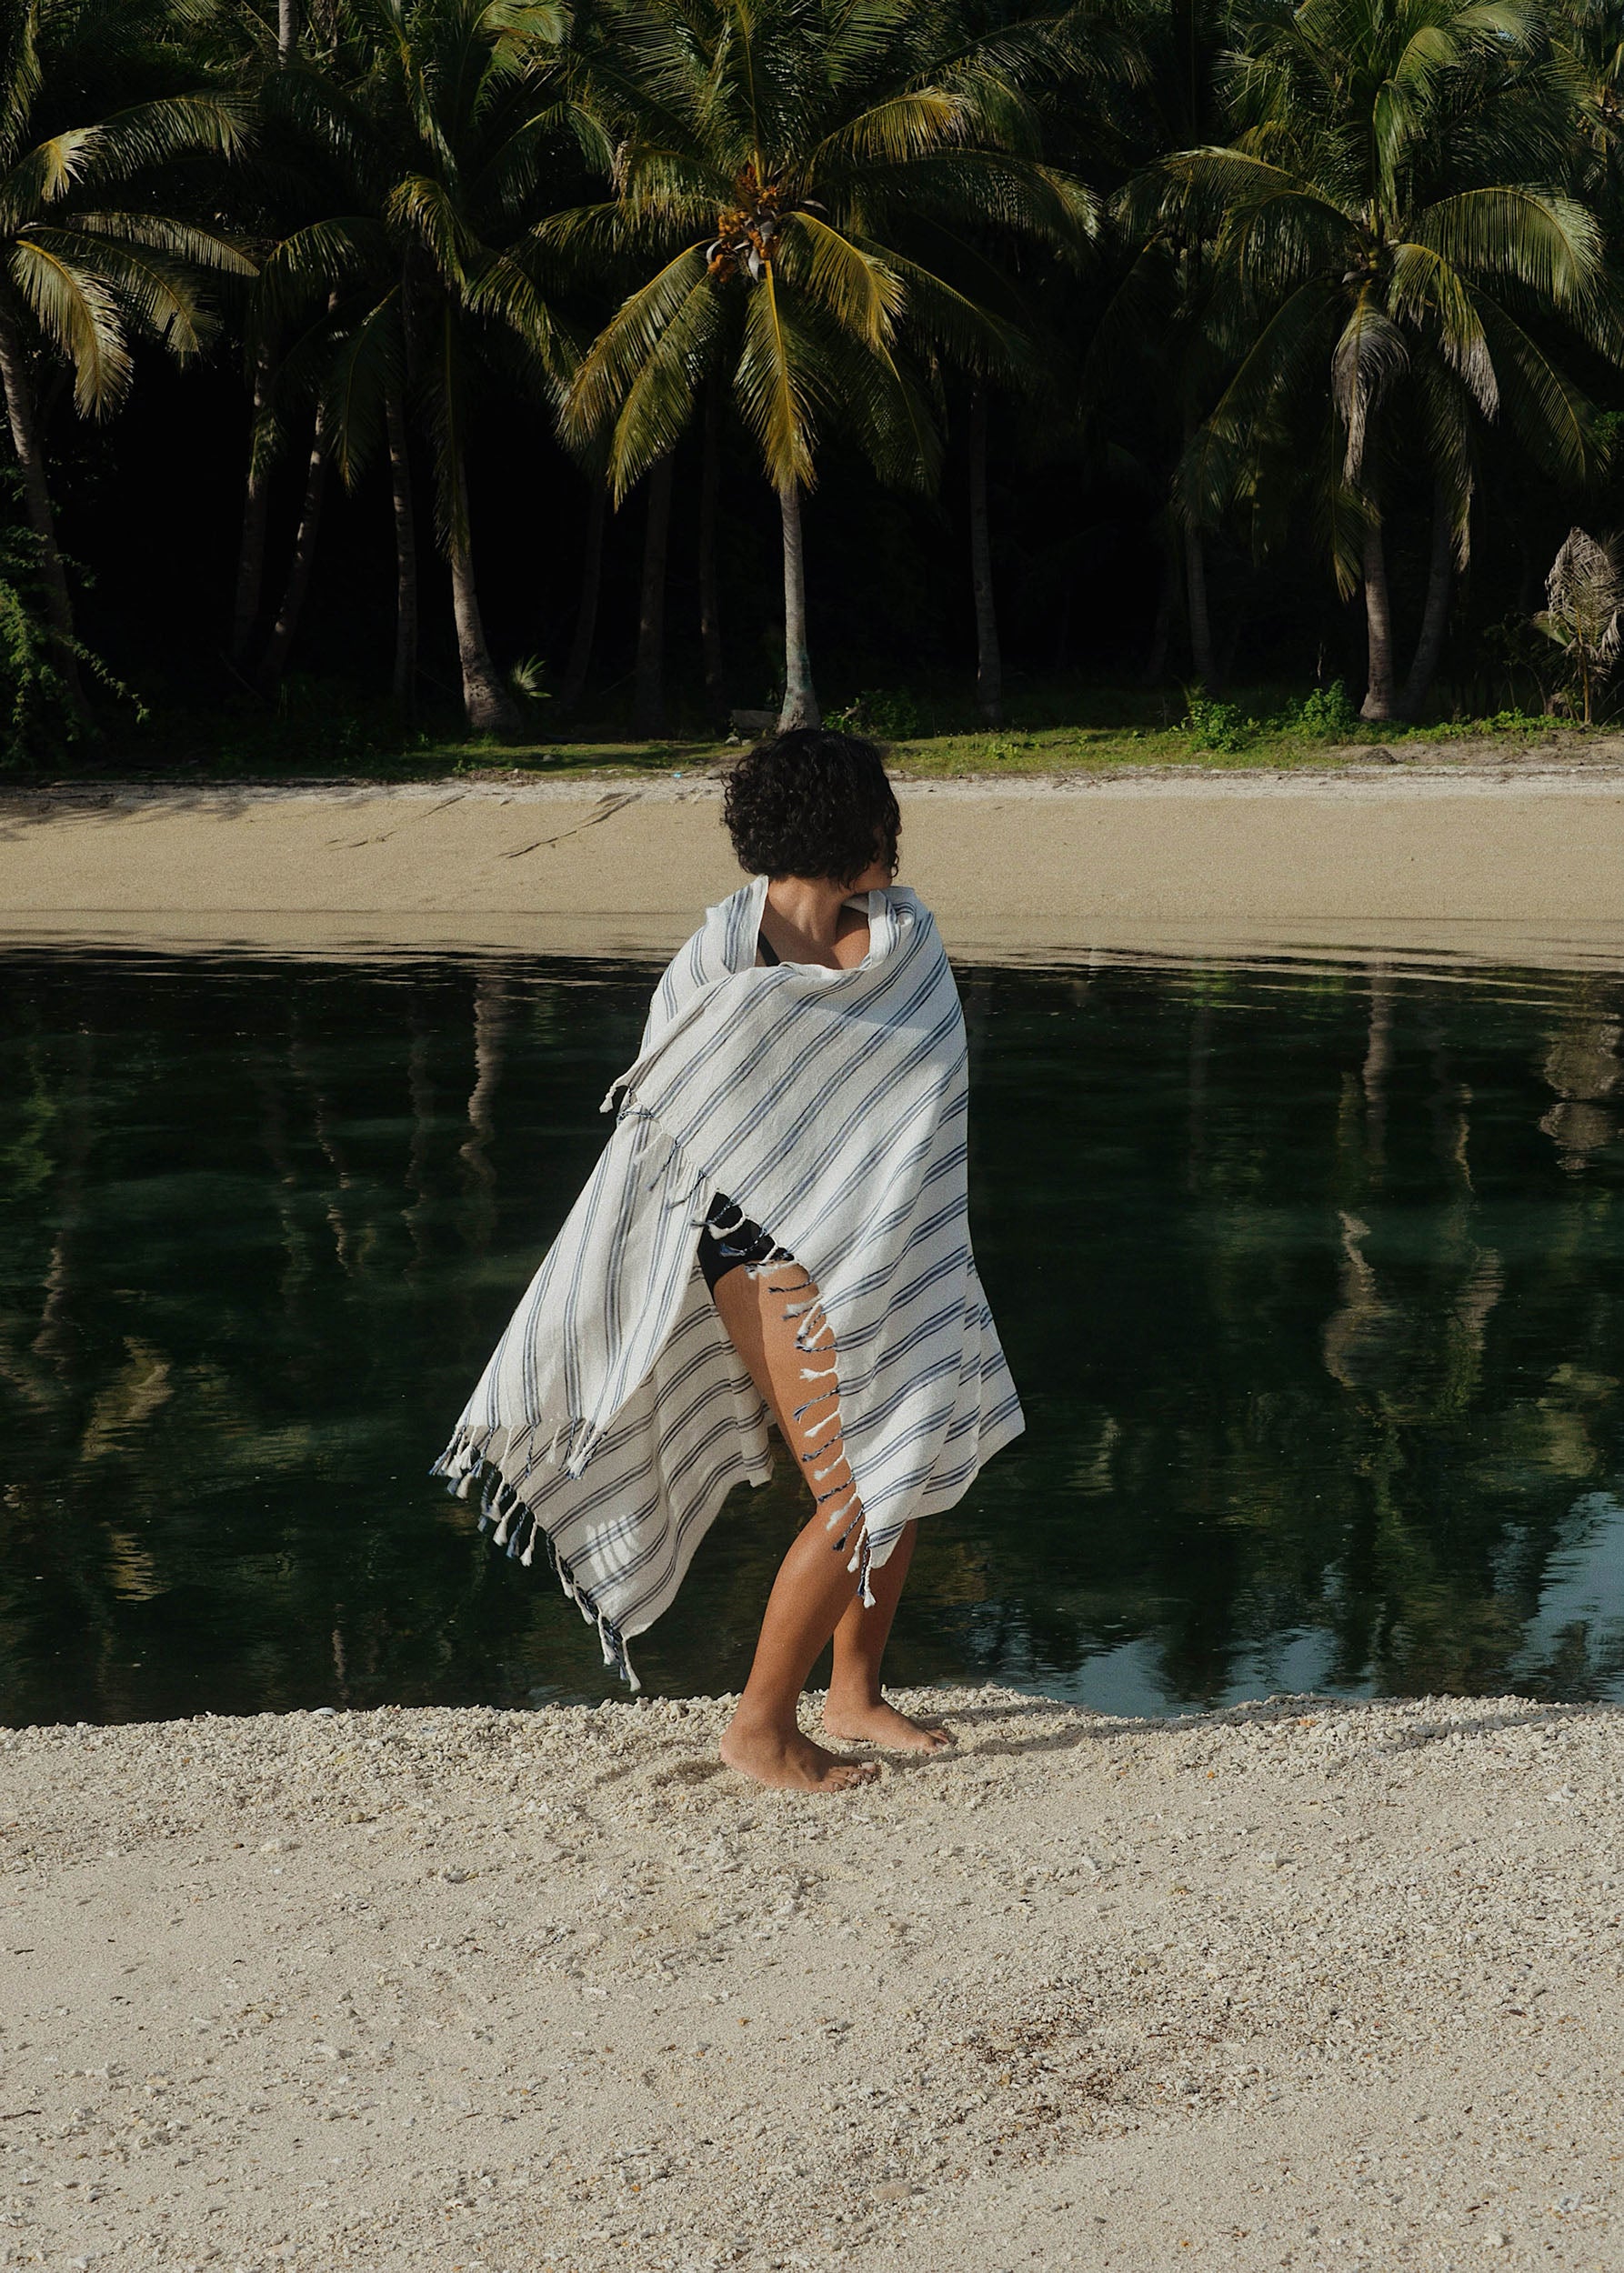 vianca wrapped in sapphire towel